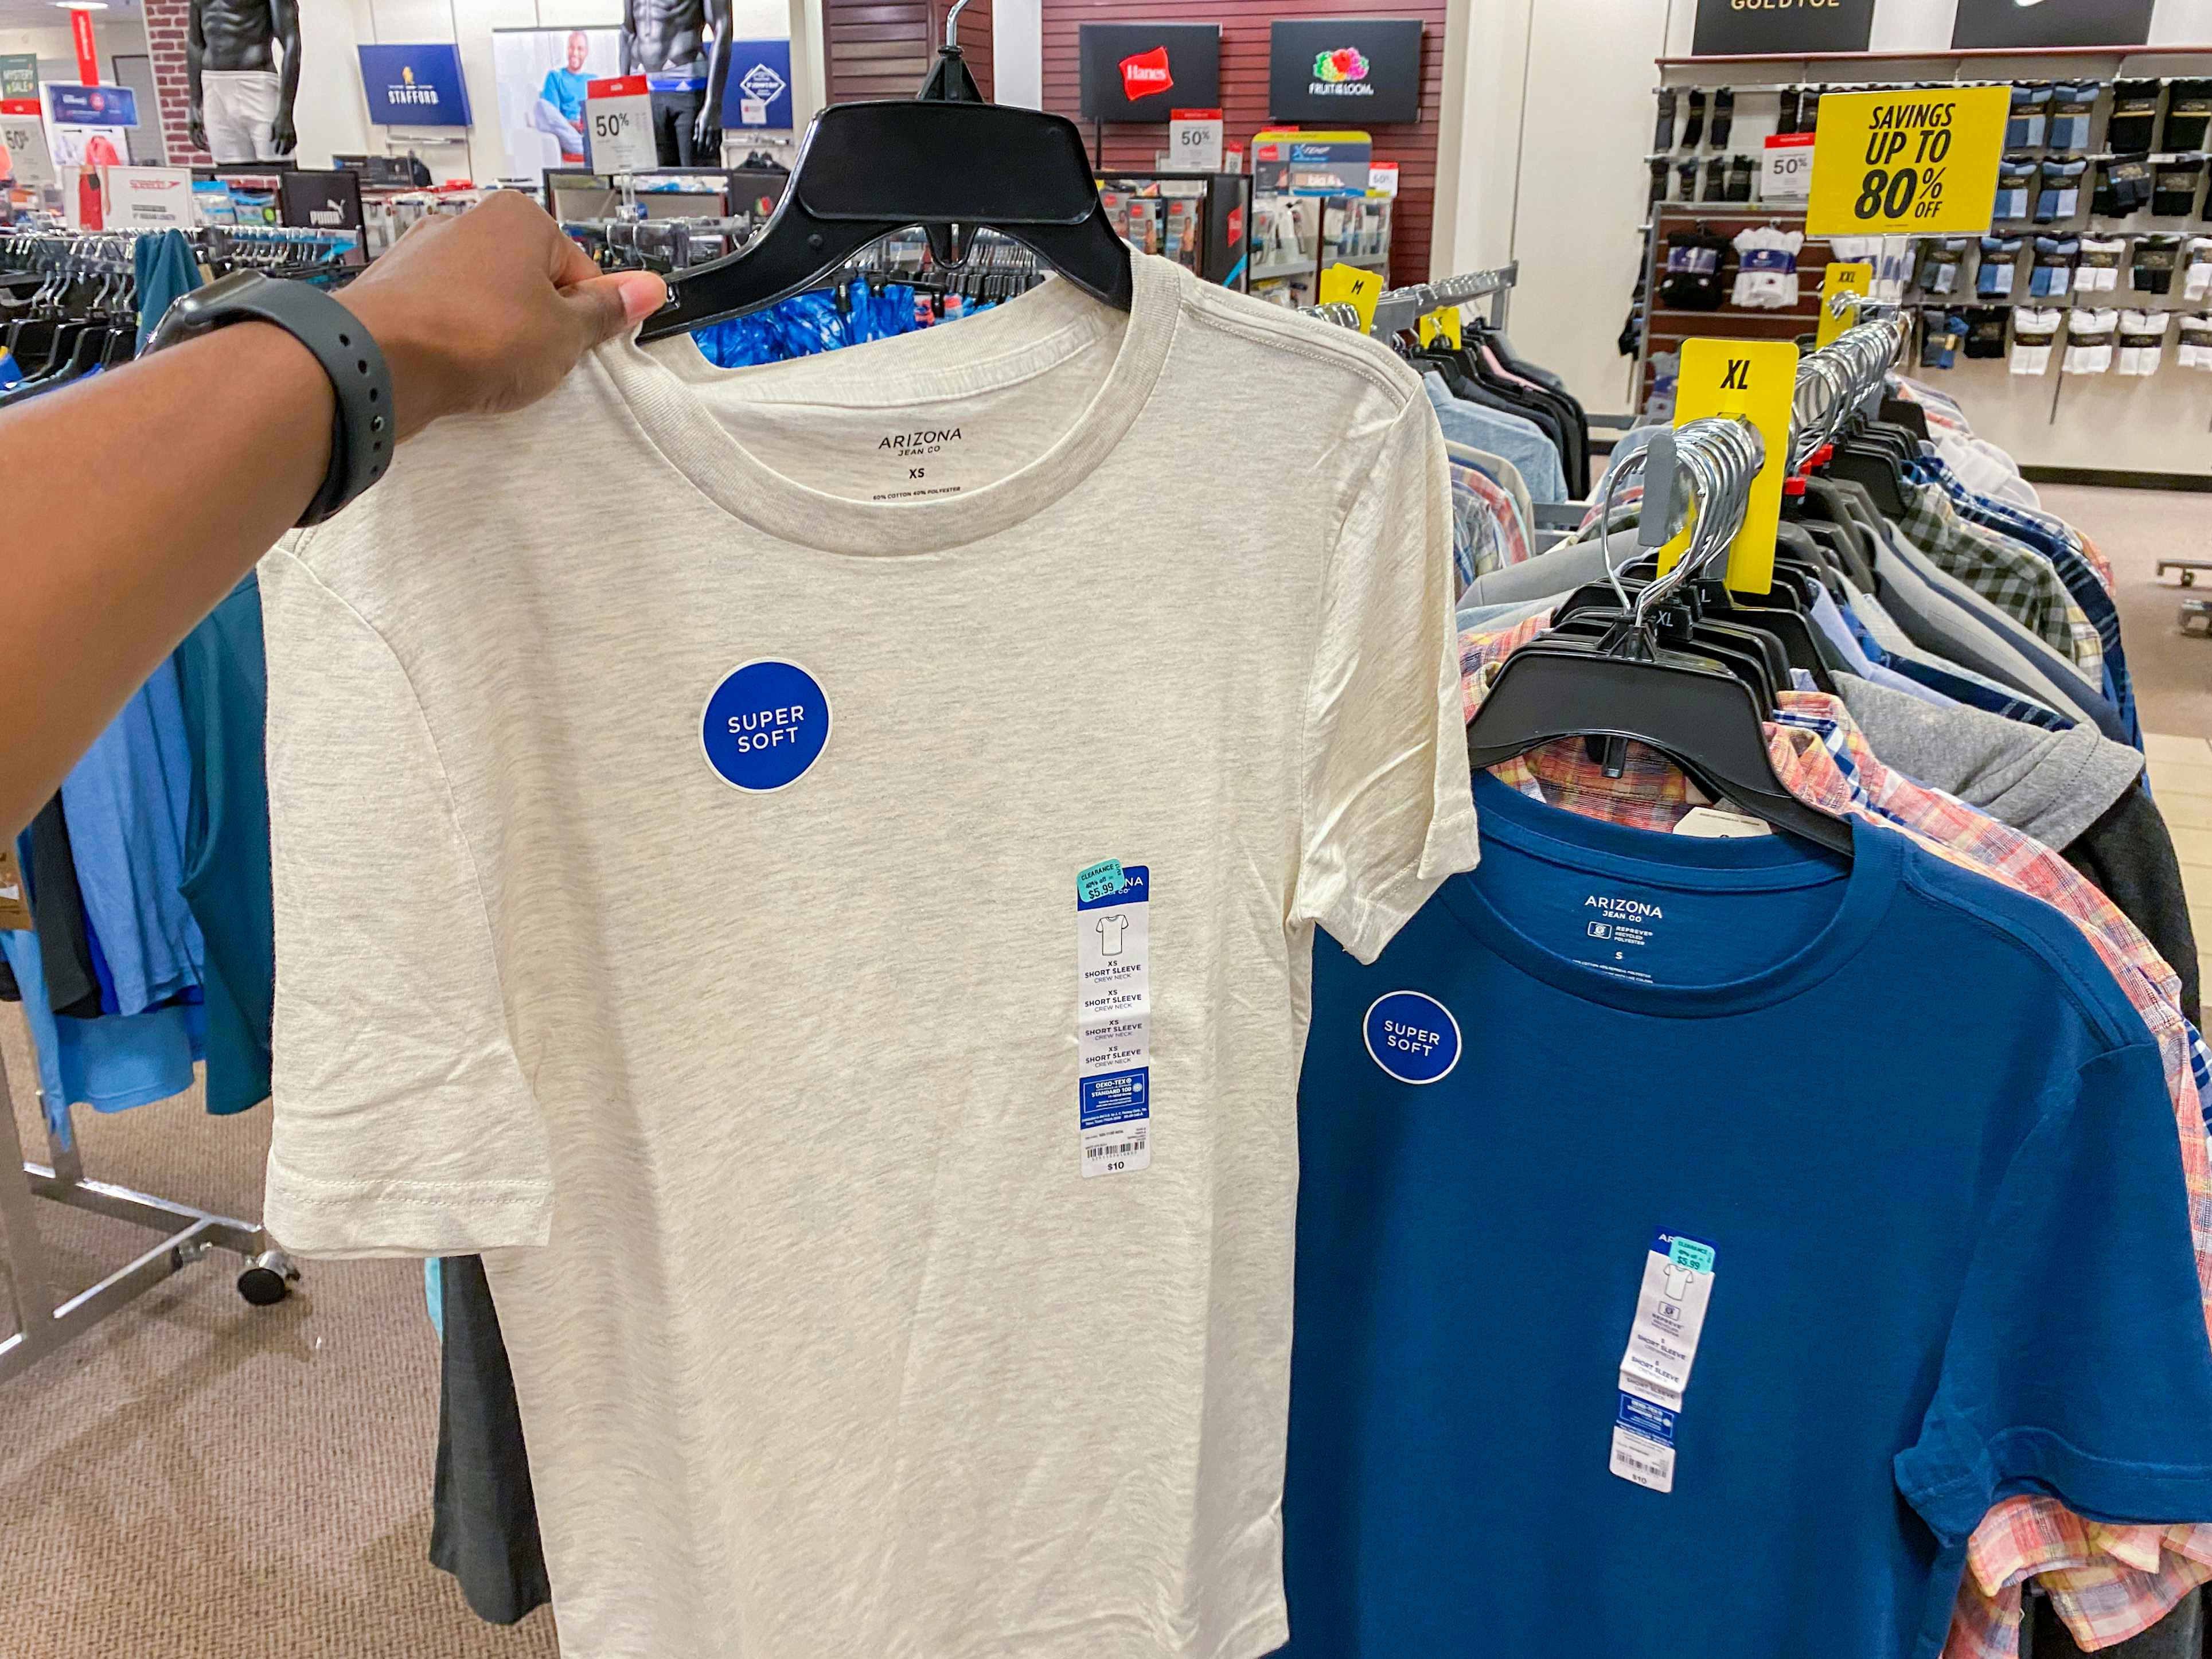 a t shirt being held beside another t shirt in the clearance section at jc penny